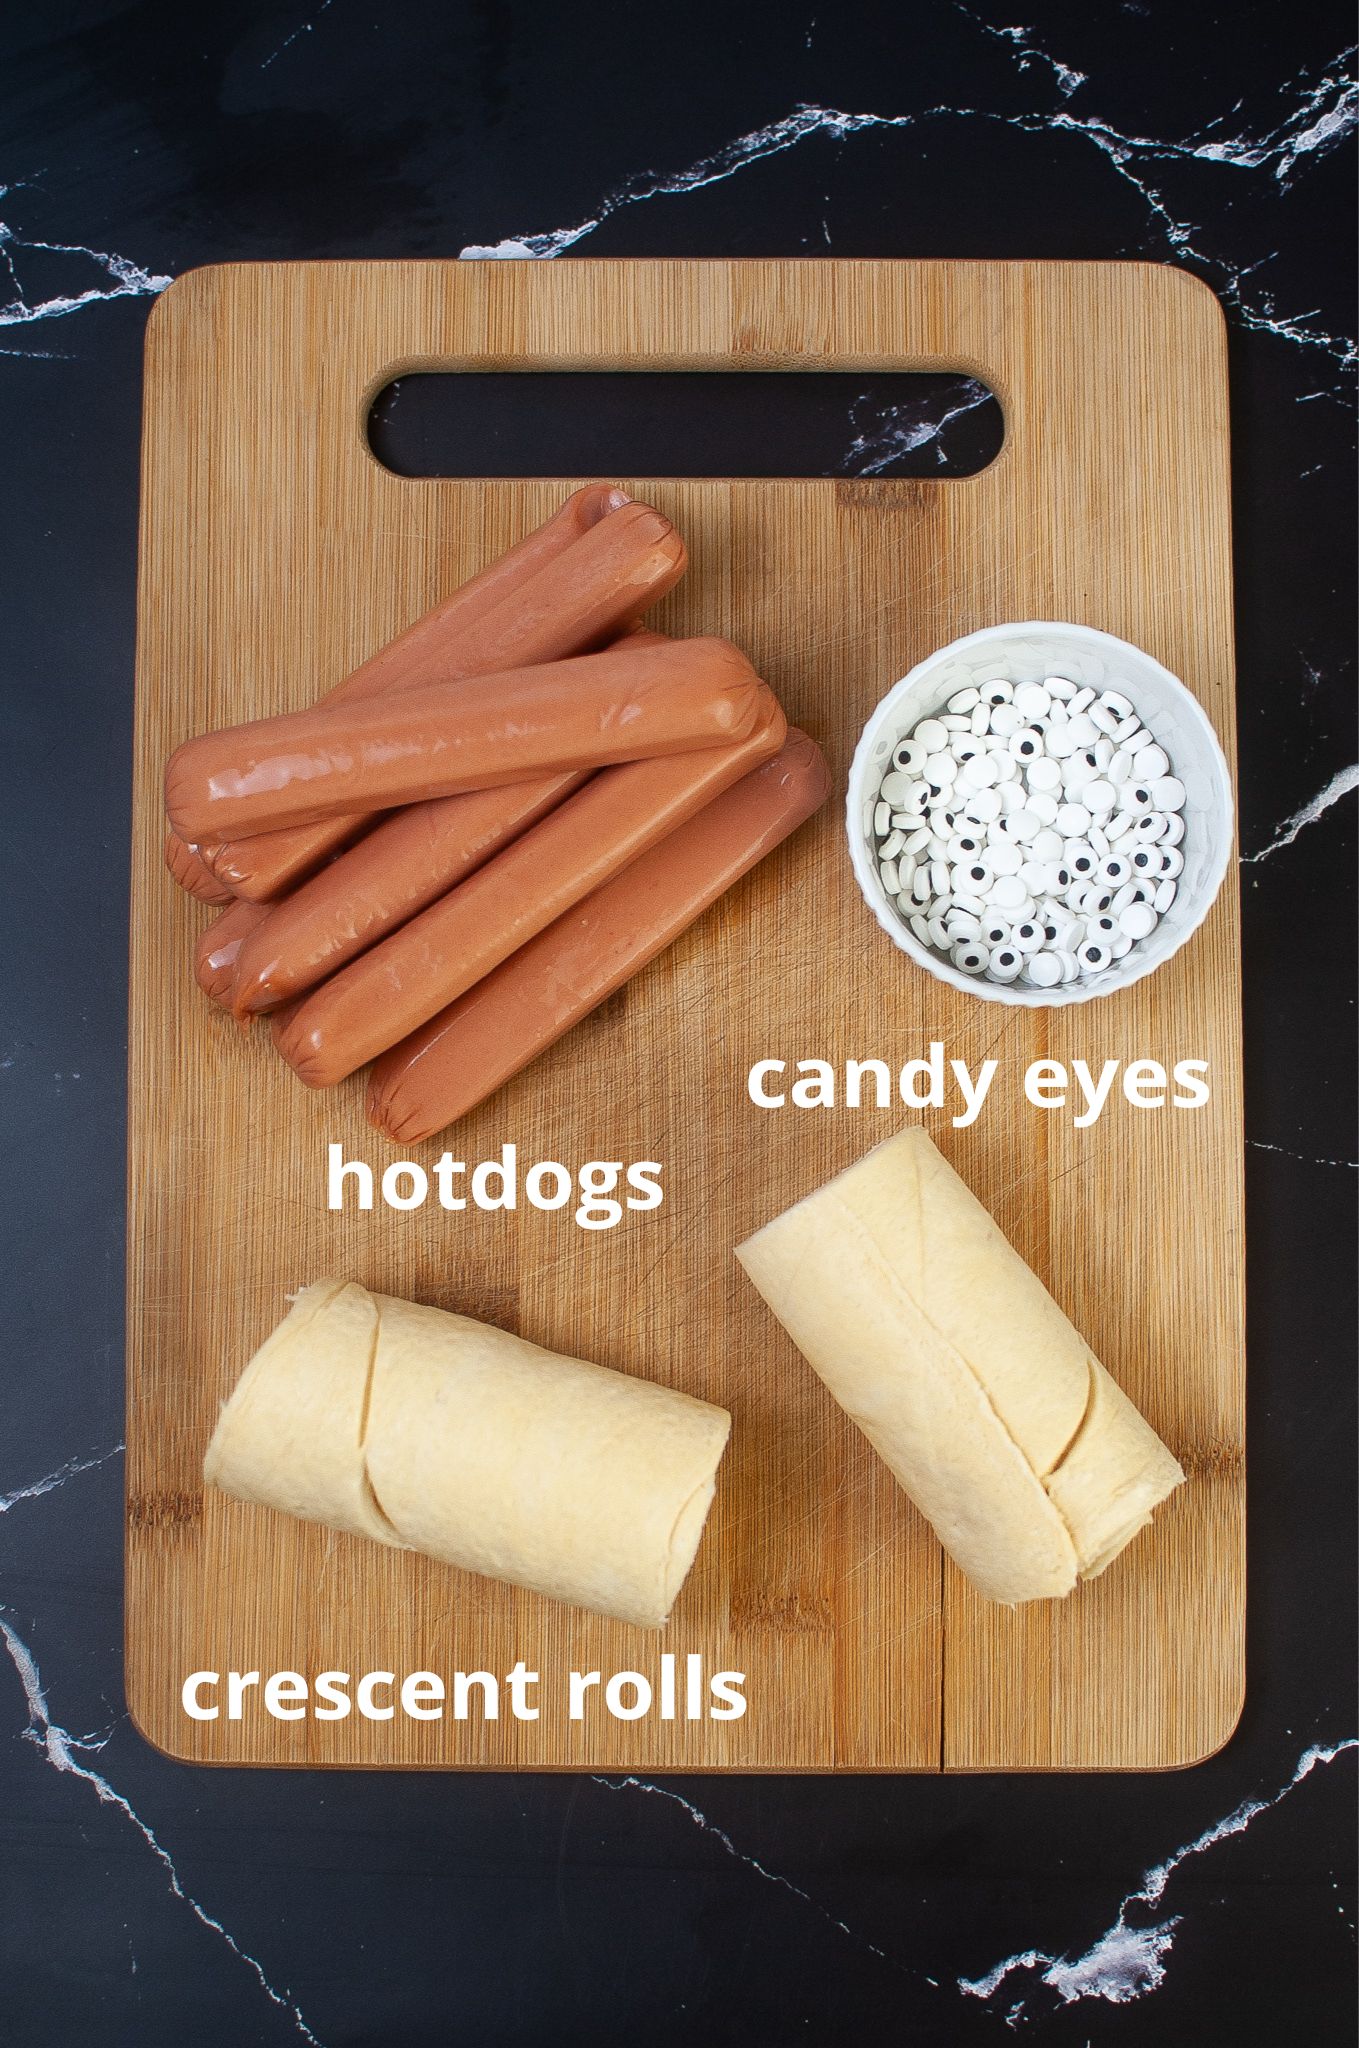 hotdogs, candy eyeballs, and cresecent rolls on a wooden cutting board